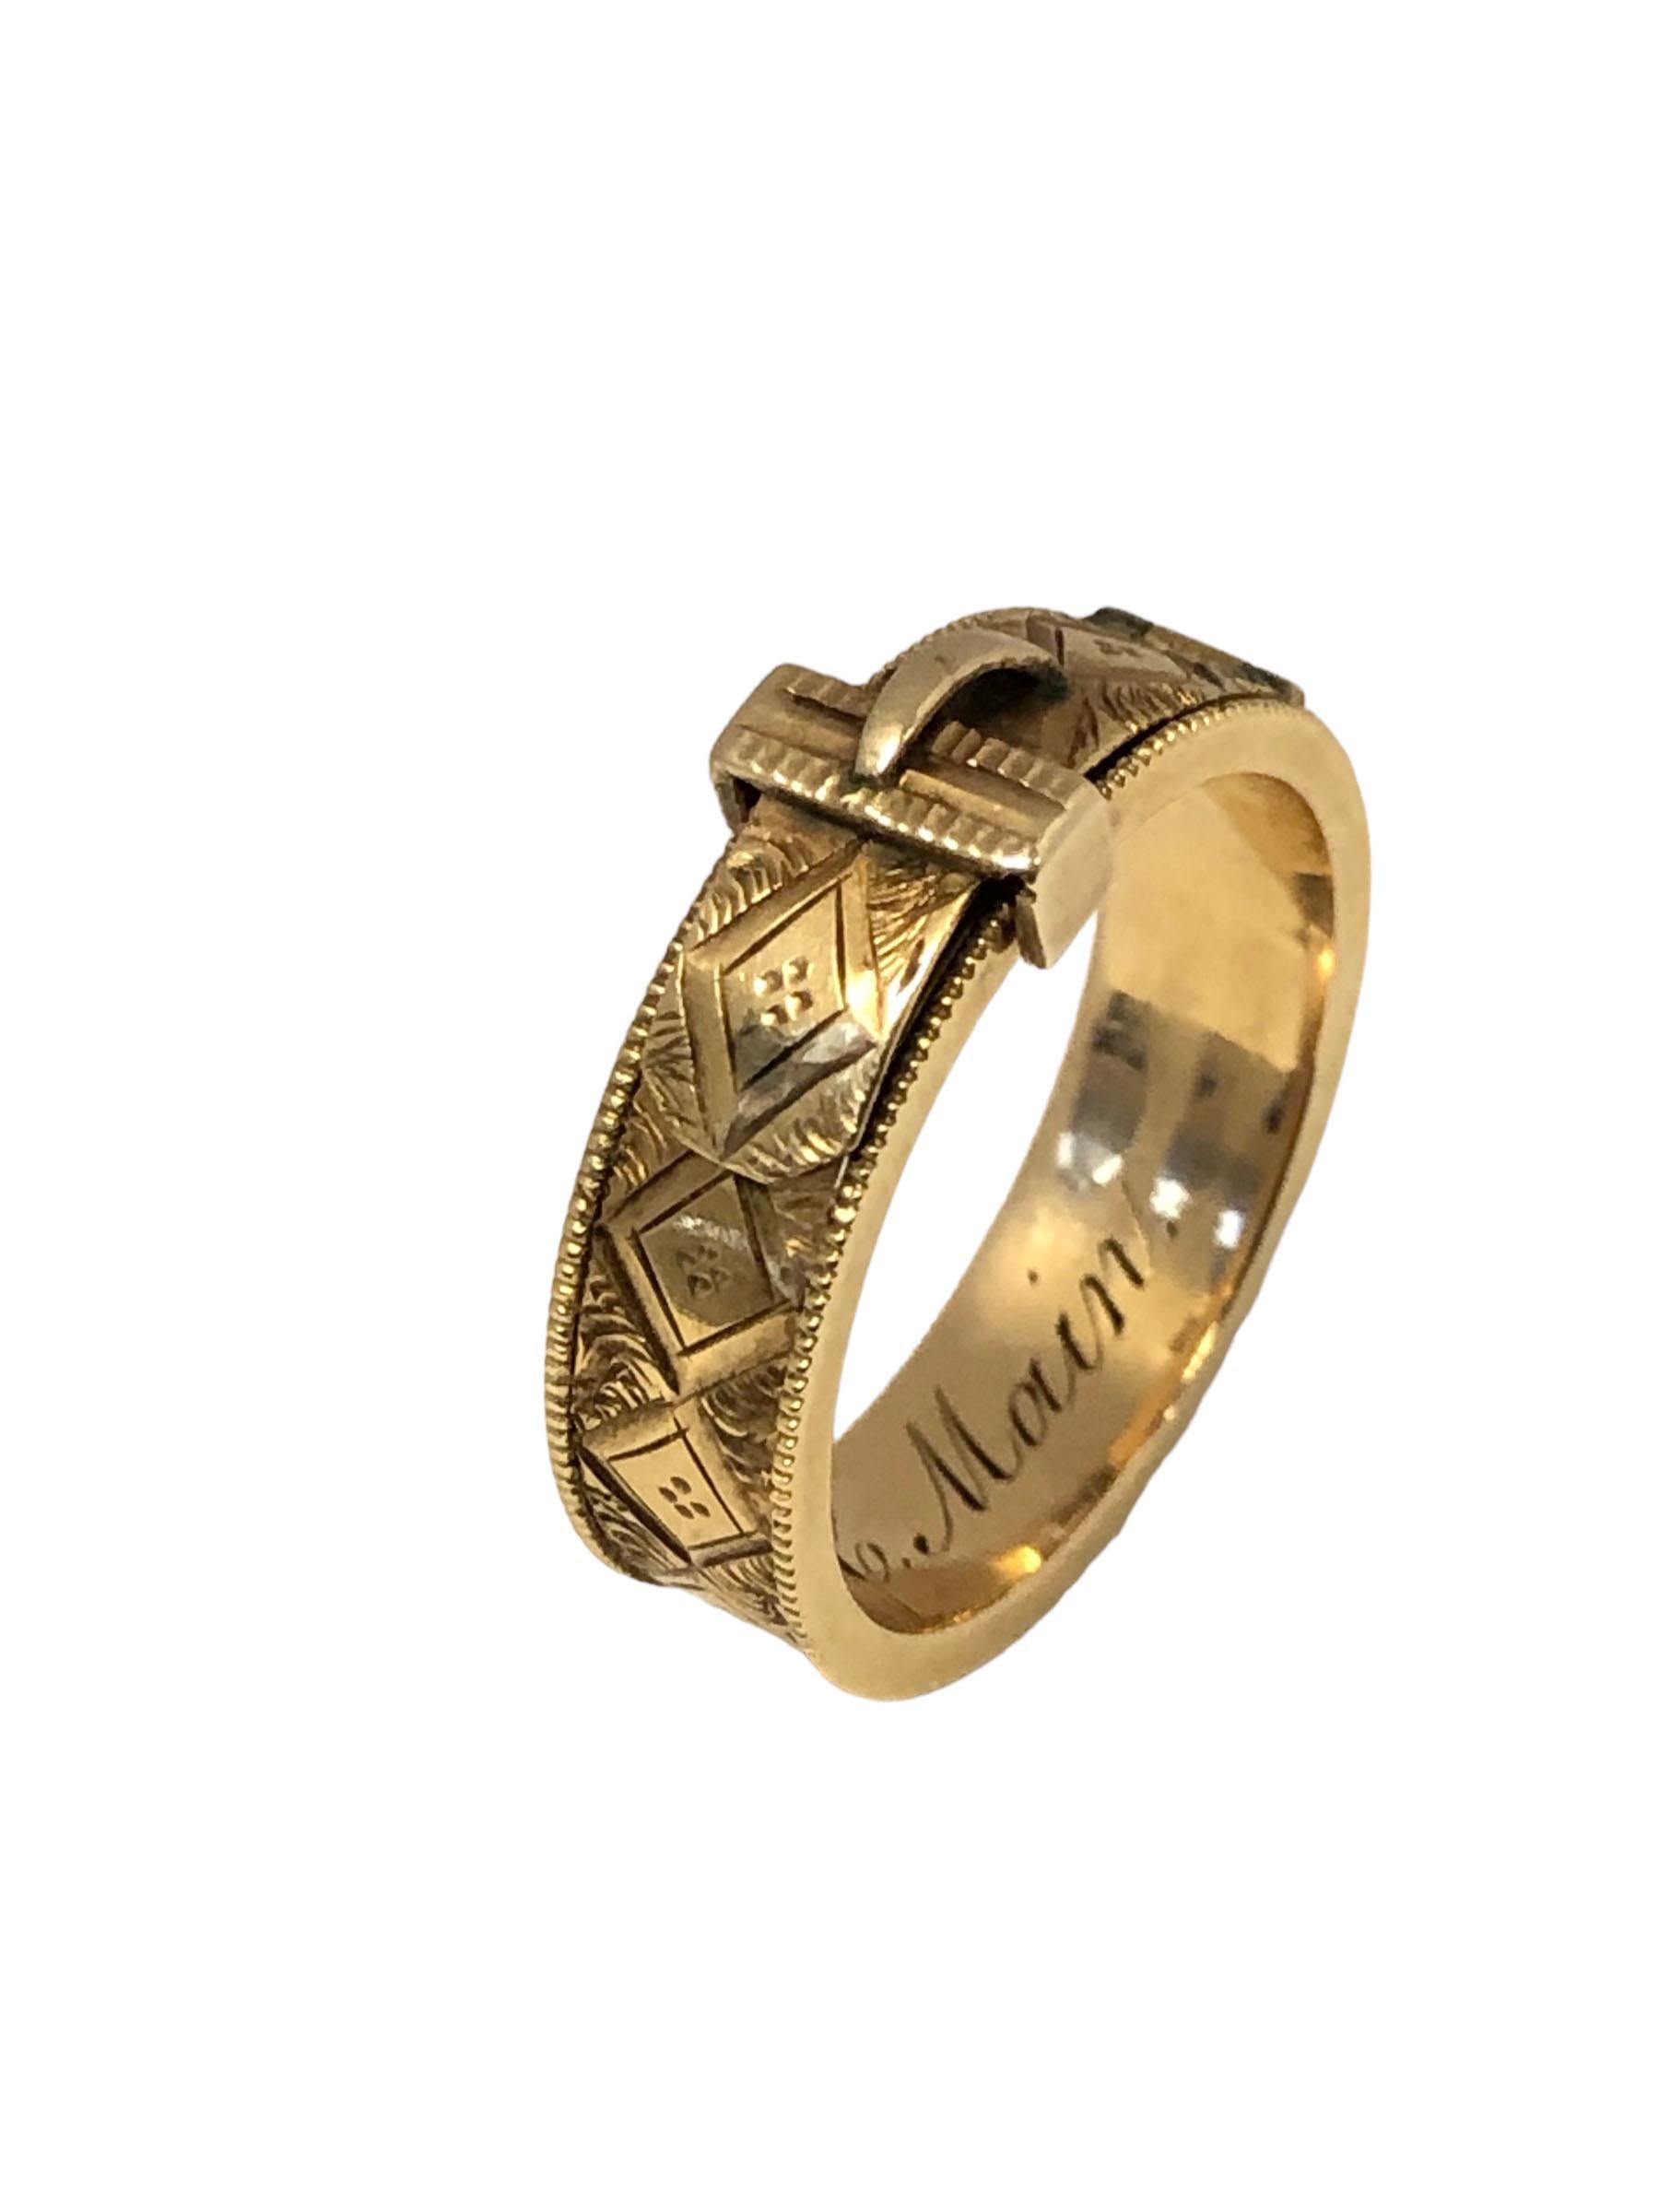 Women's or Men's Antique Victorian Gold Buckle Form Mourning Memento Ring For Sale